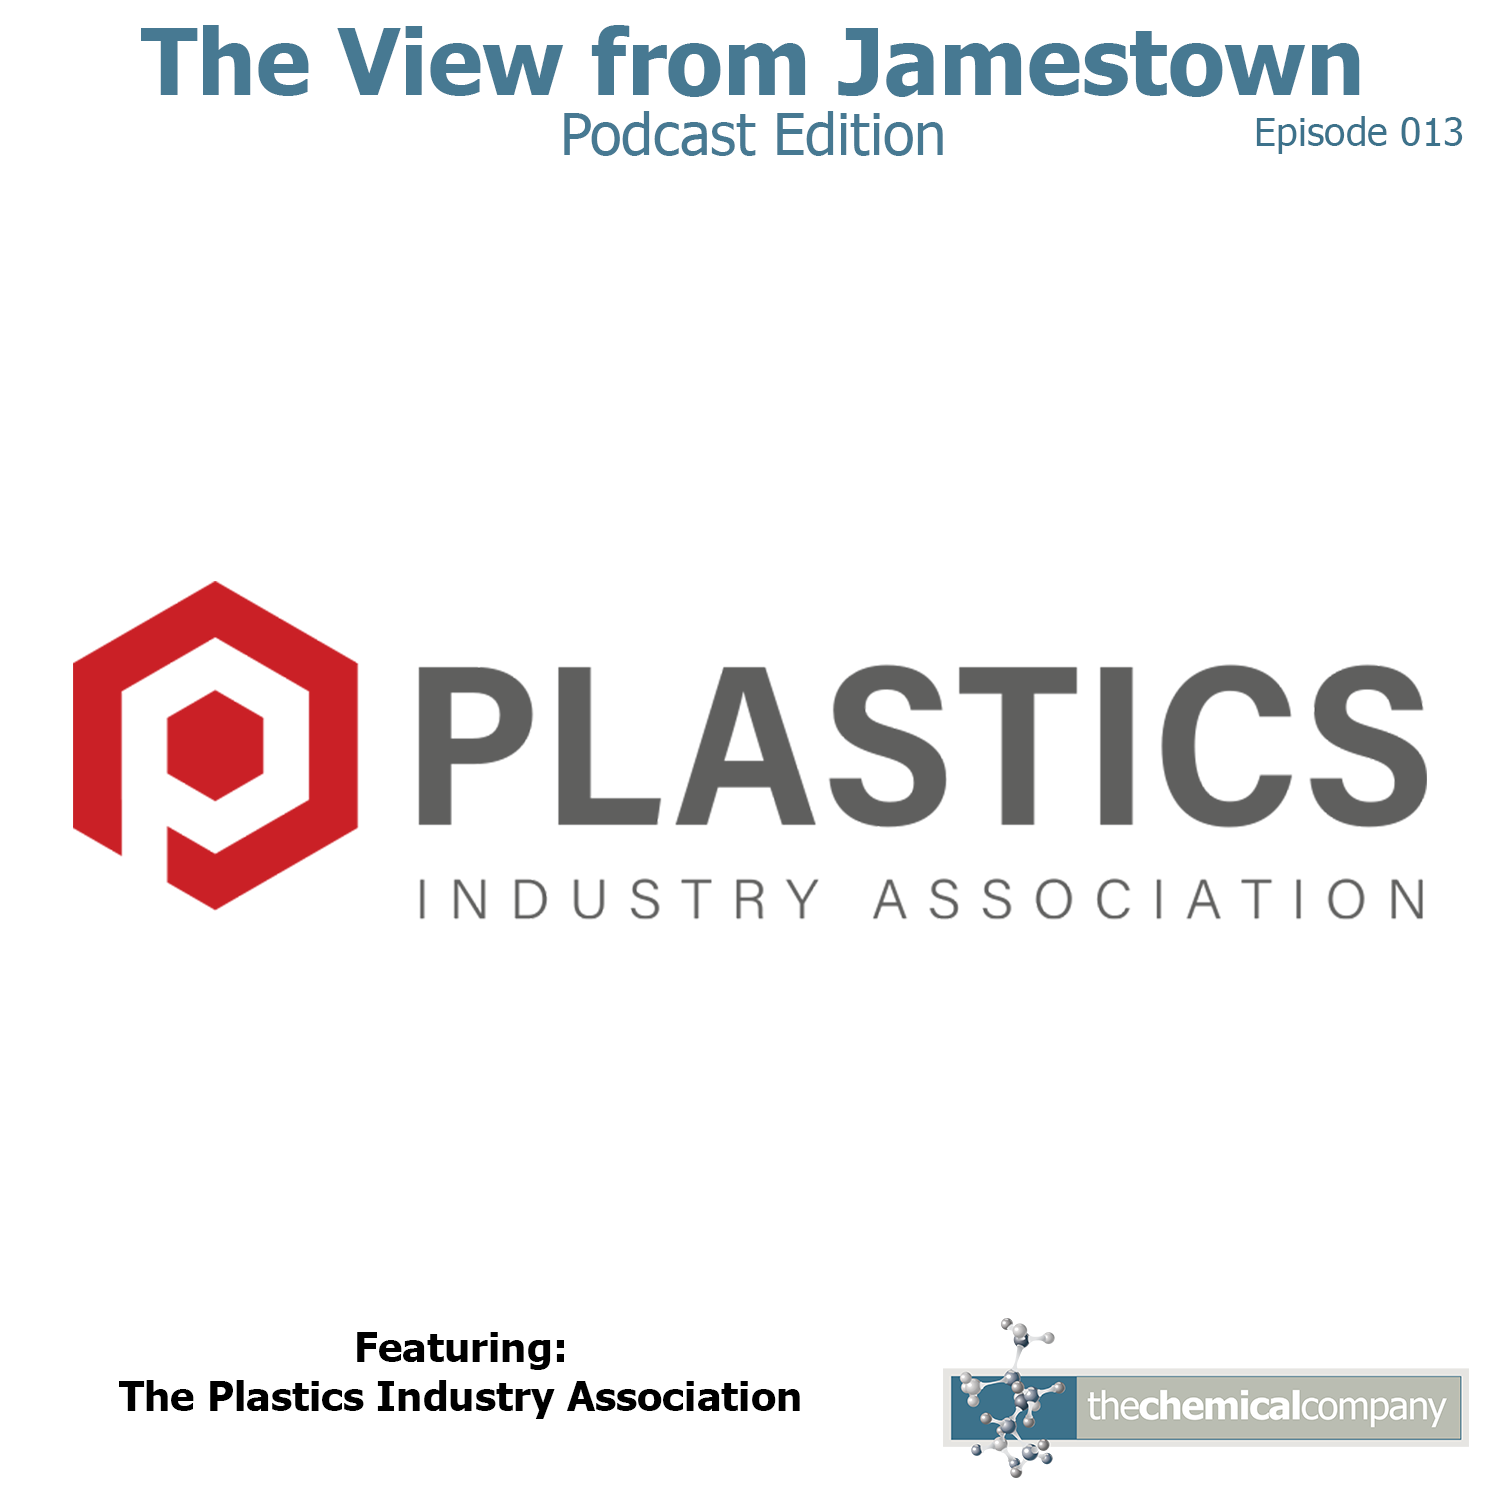 The PLASTICS Industry Association Podcast The View from Jamestown